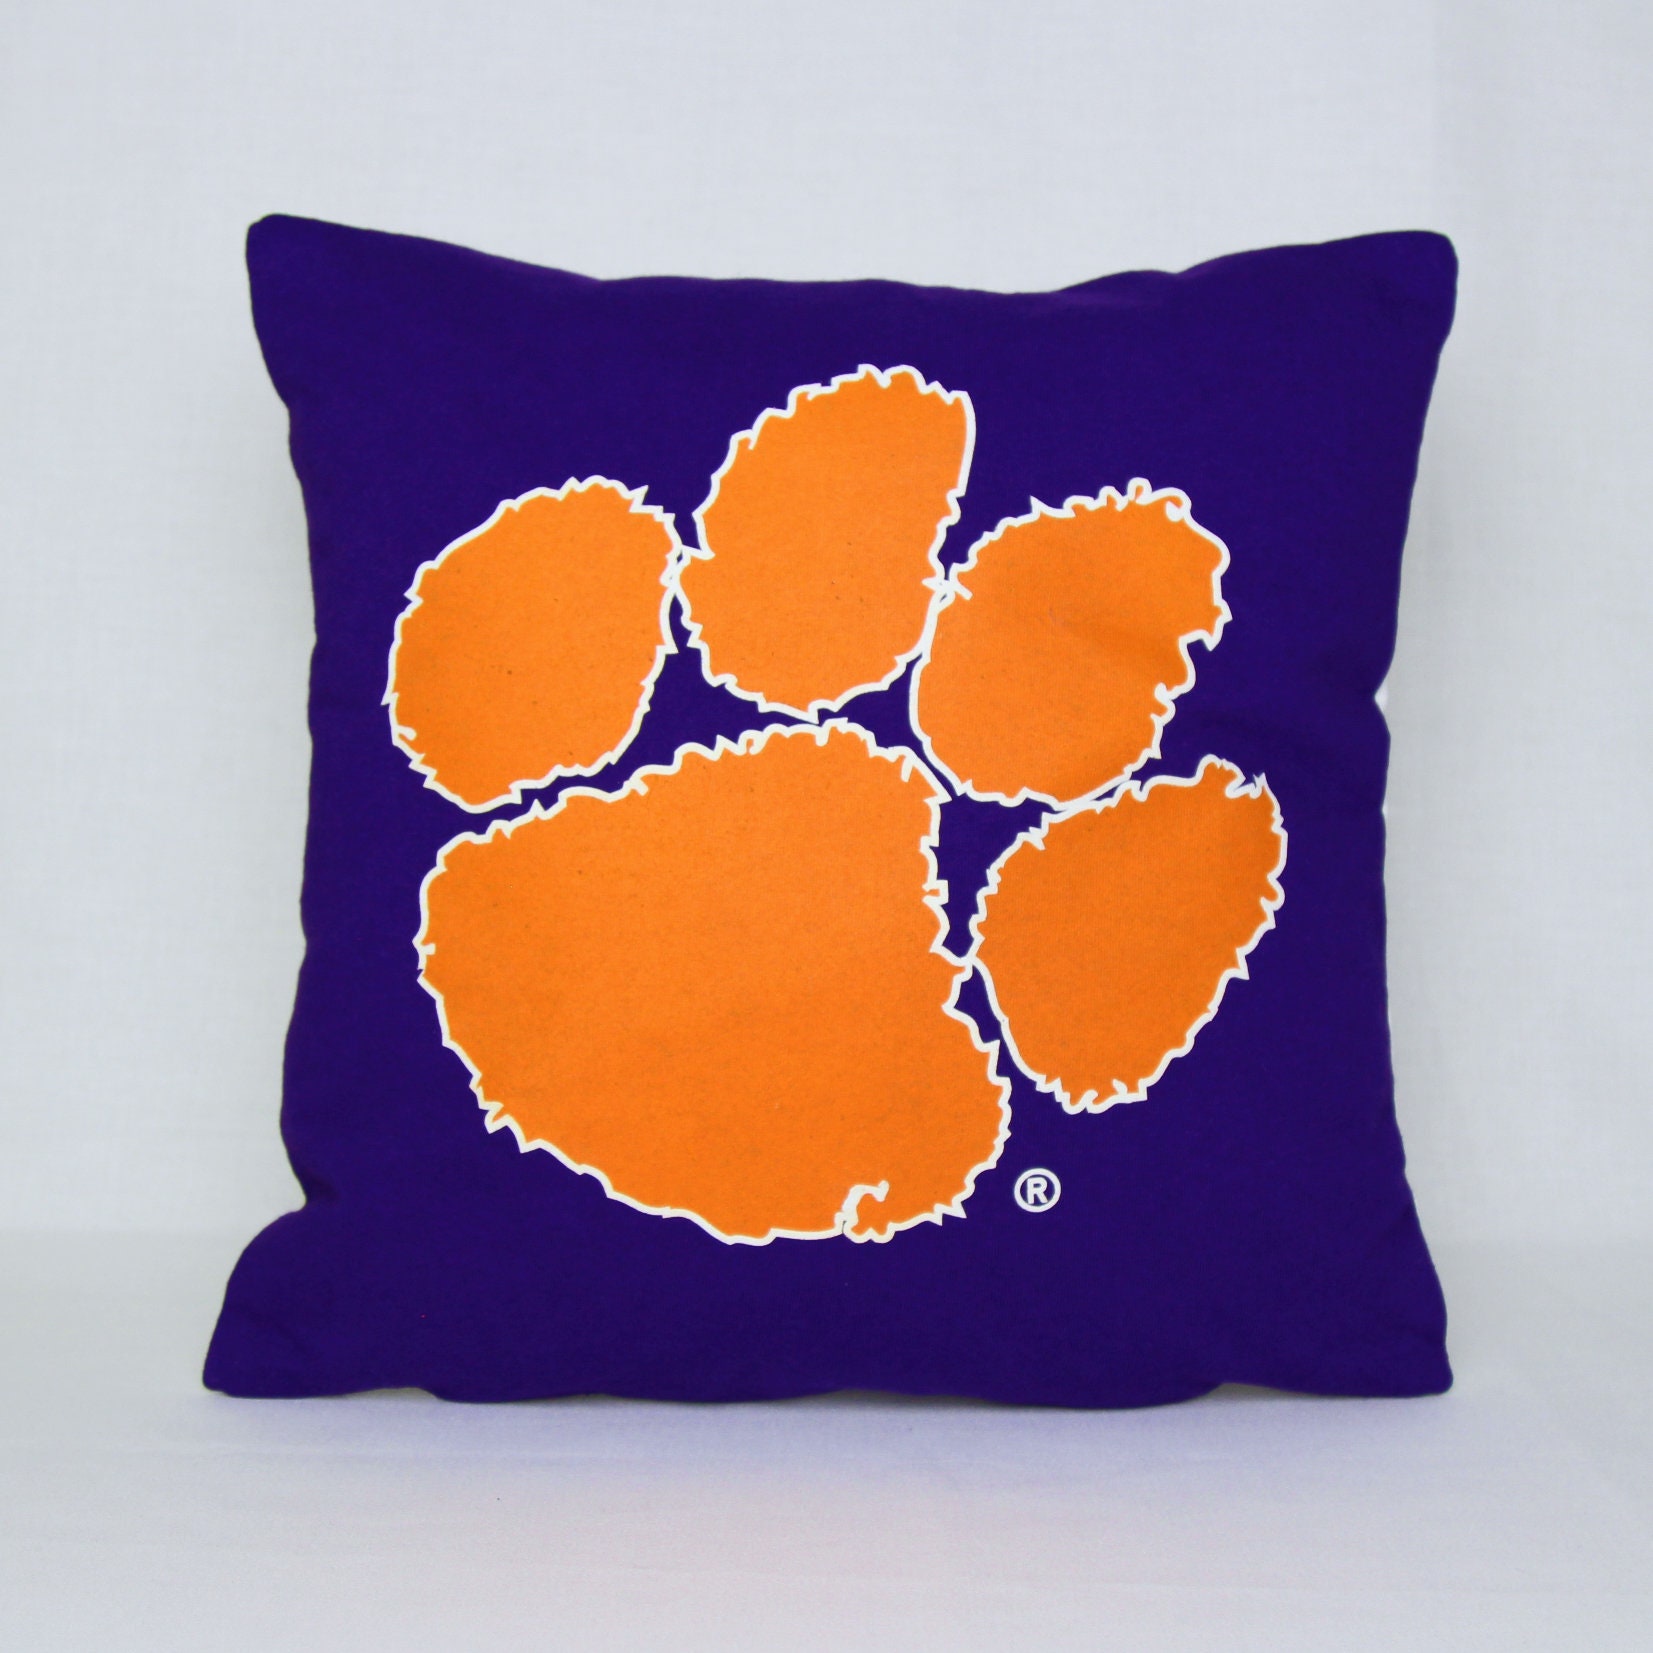 Can be Personalized Made from t Shirt Clemson University 16 Pillow Cover